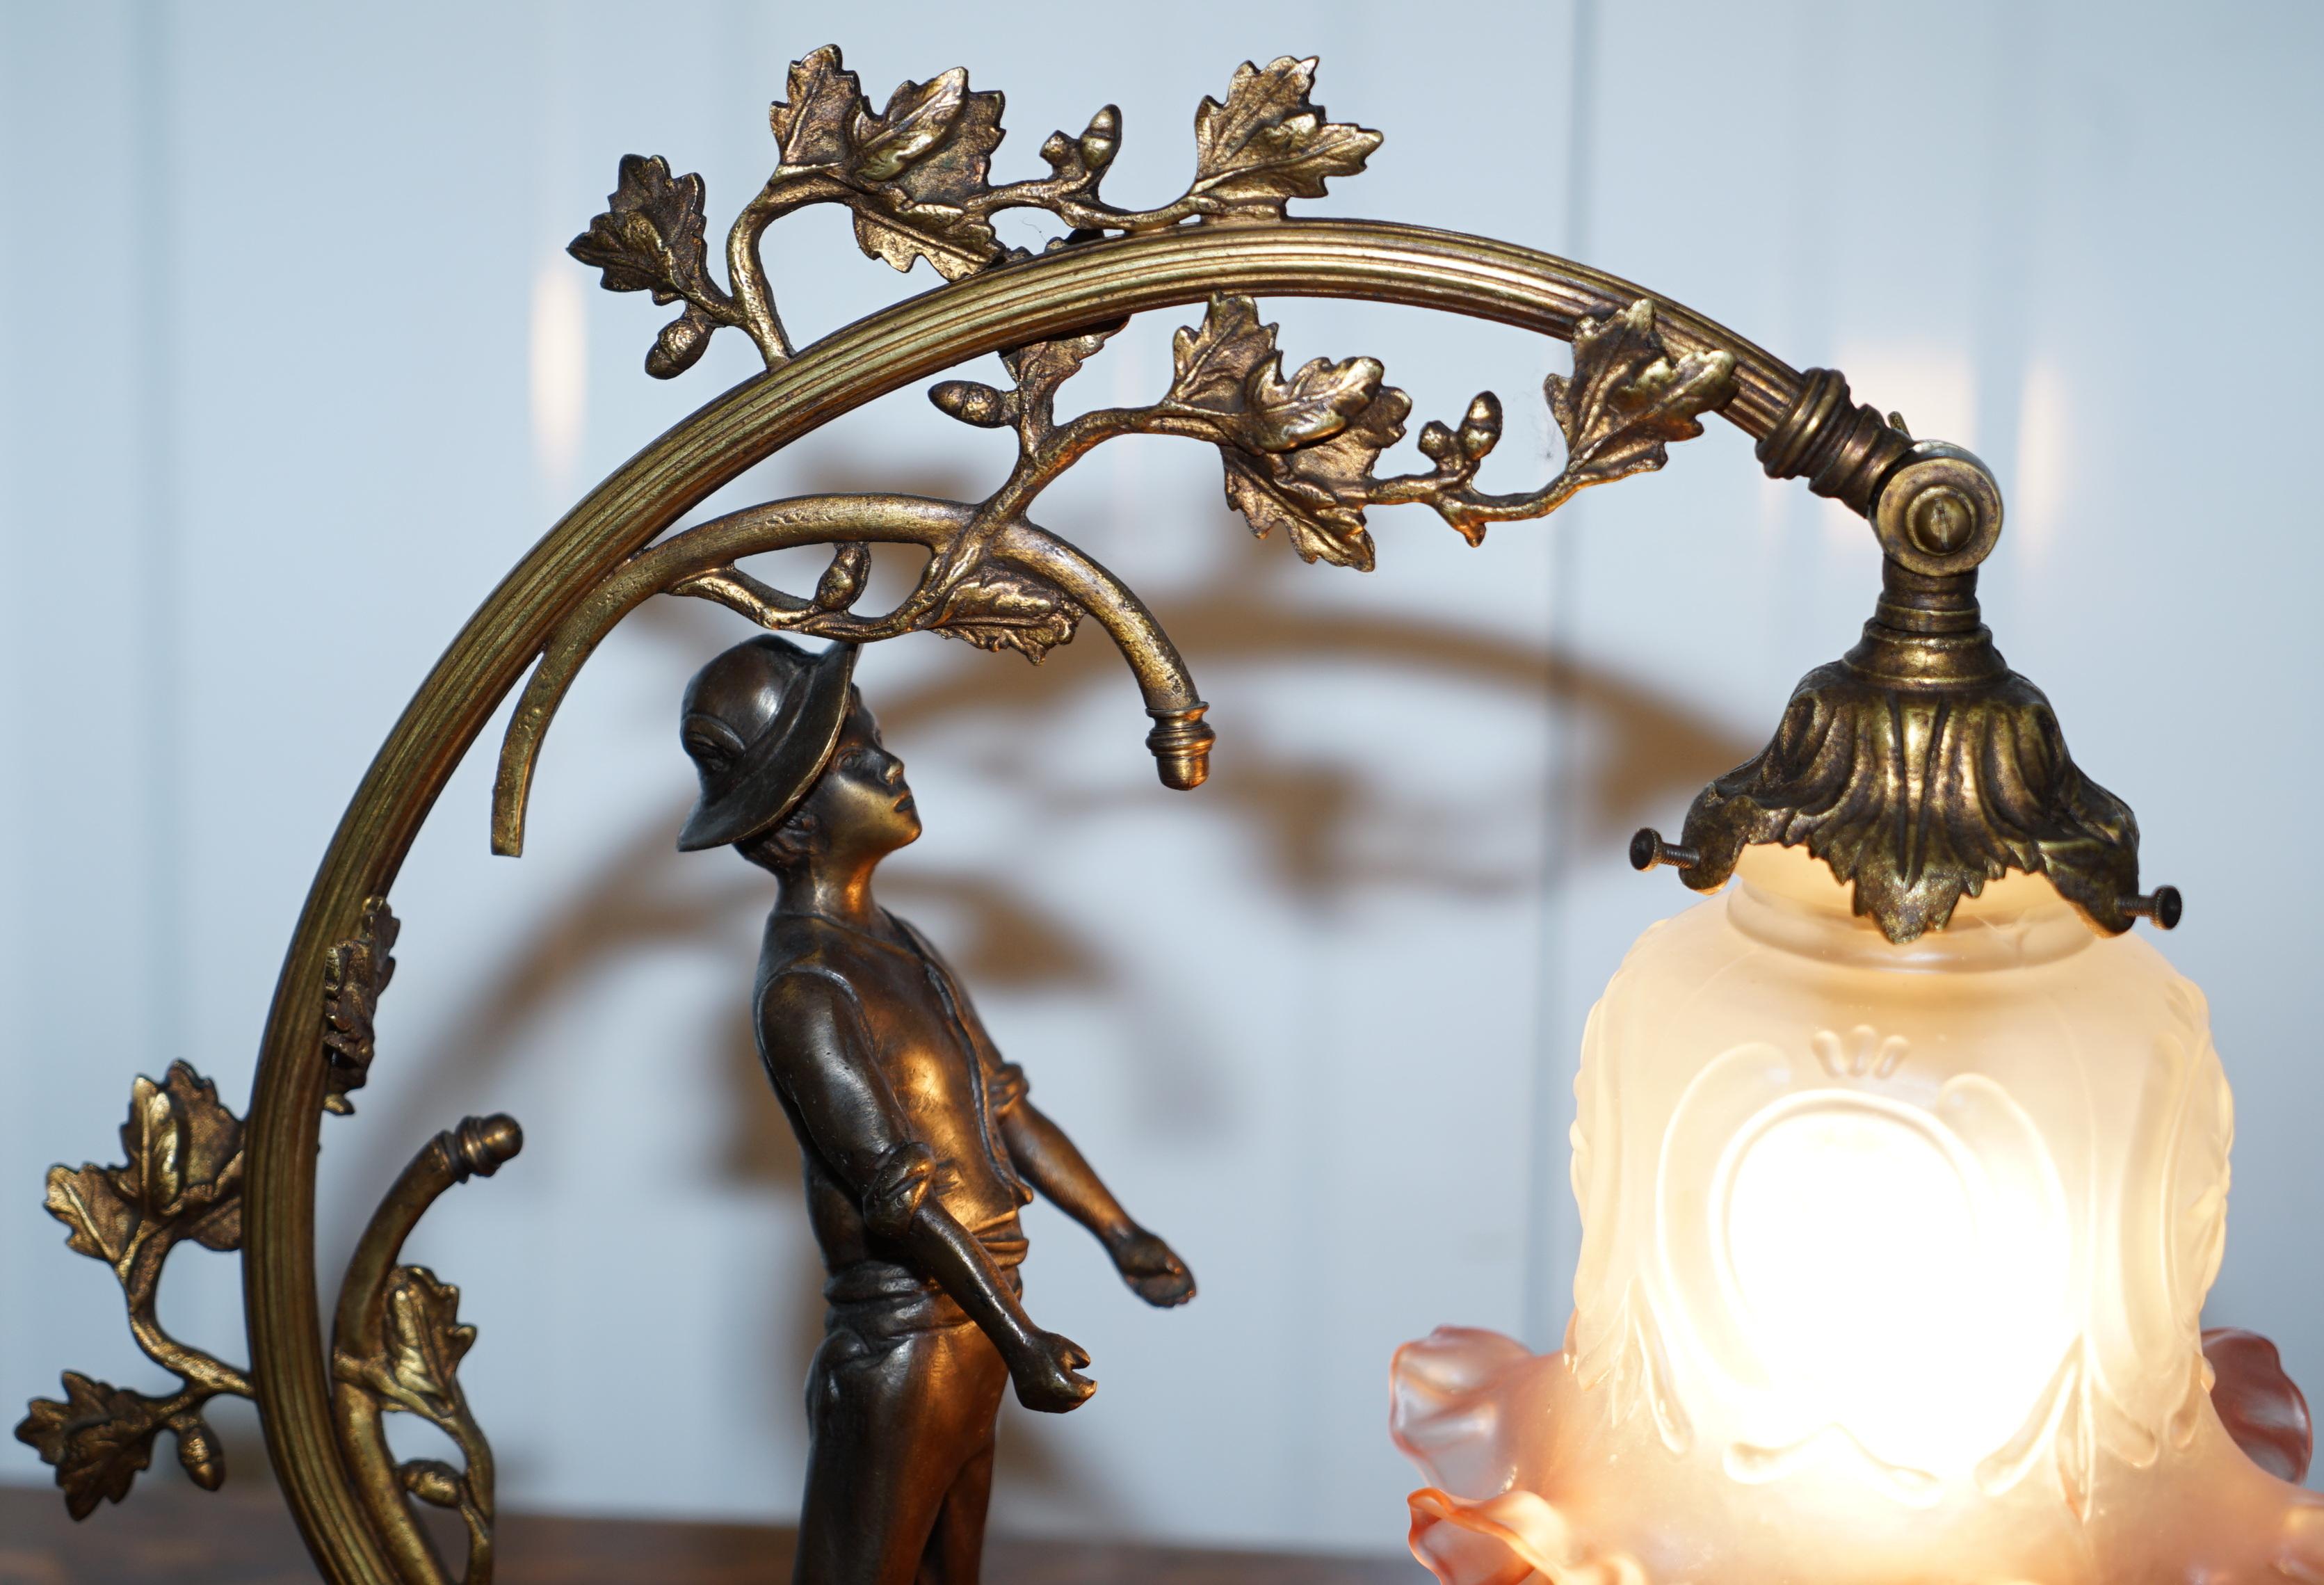 Cast Stunning Solid Bronze circa 1920 Table Lamp with Statue Original Shade Rare Find